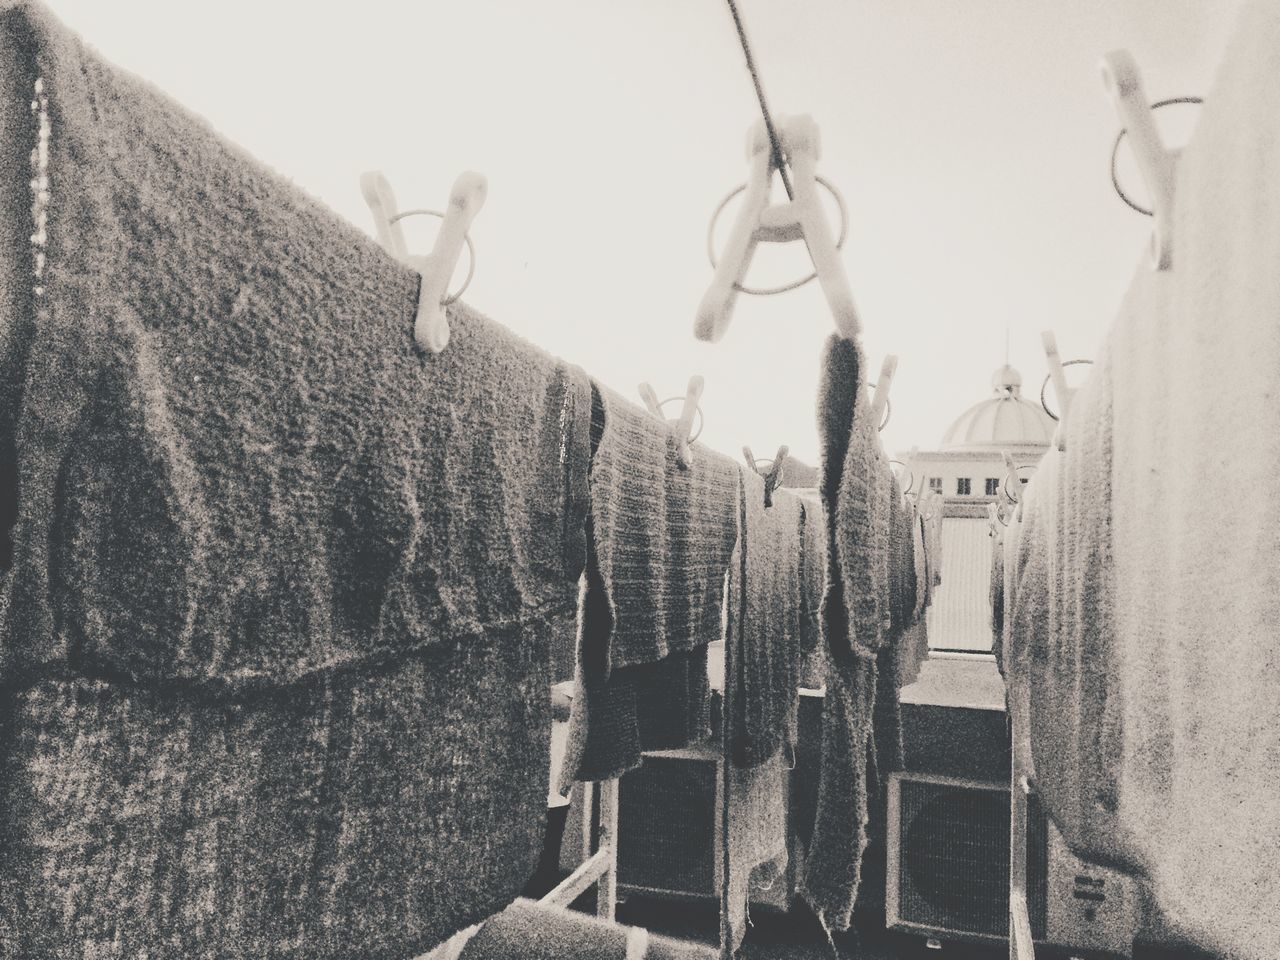 LOW ANGLE VIEW OF CLOTHES DRYING ON CLOTHESLINE AGAINST BUILDINGS